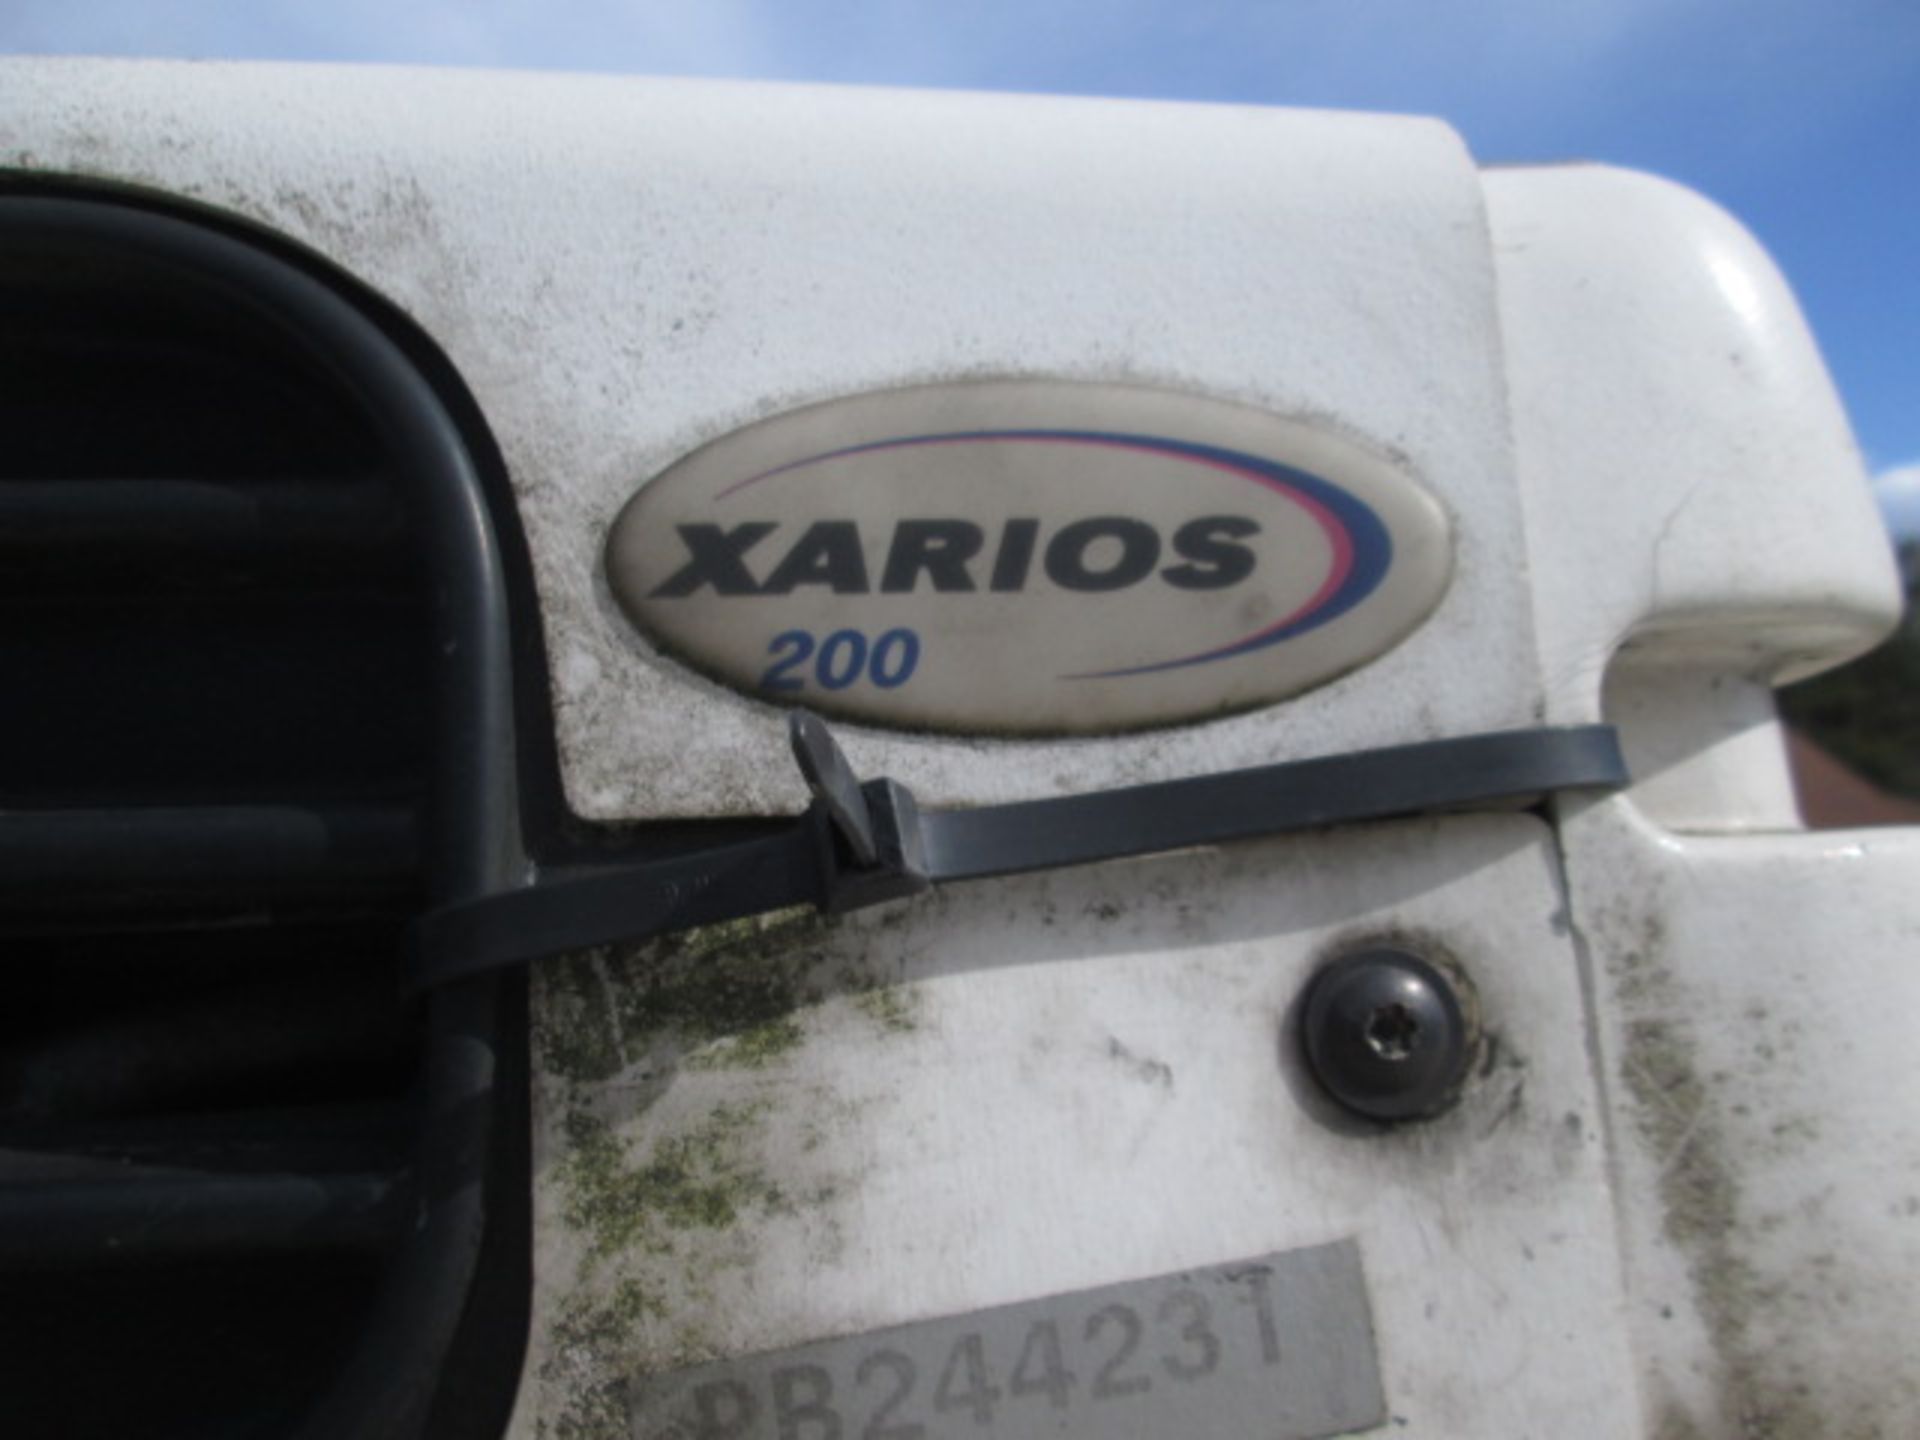 CW52 HRM - Ford Transit 300 MWB TD Panel Van with Xarios 200 Refrigeration Plant Fitted. - Image 27 of 29